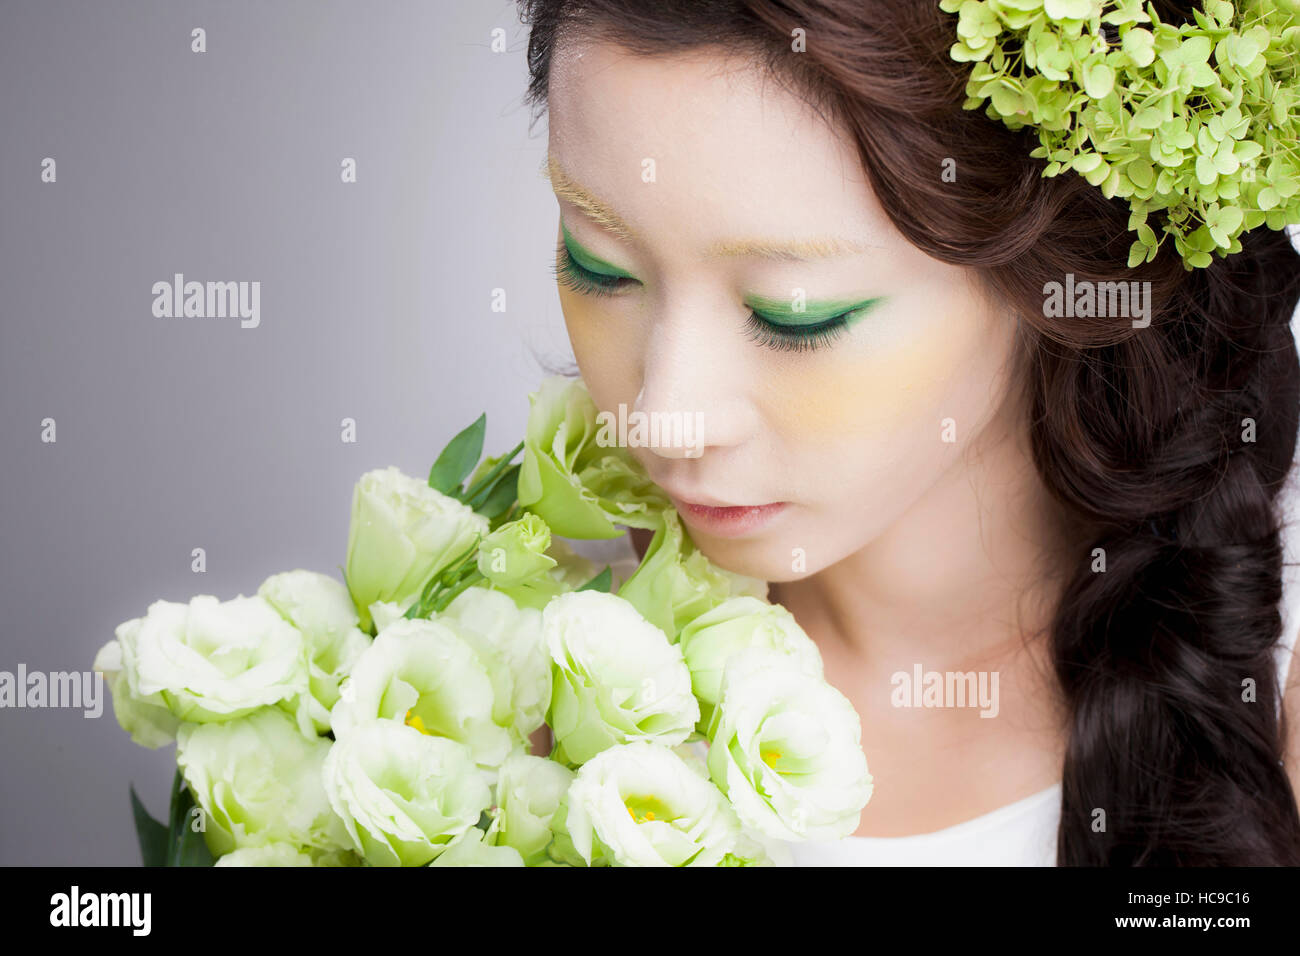 Portrait of young smiling Korean woman smelling flowers Stock Photo